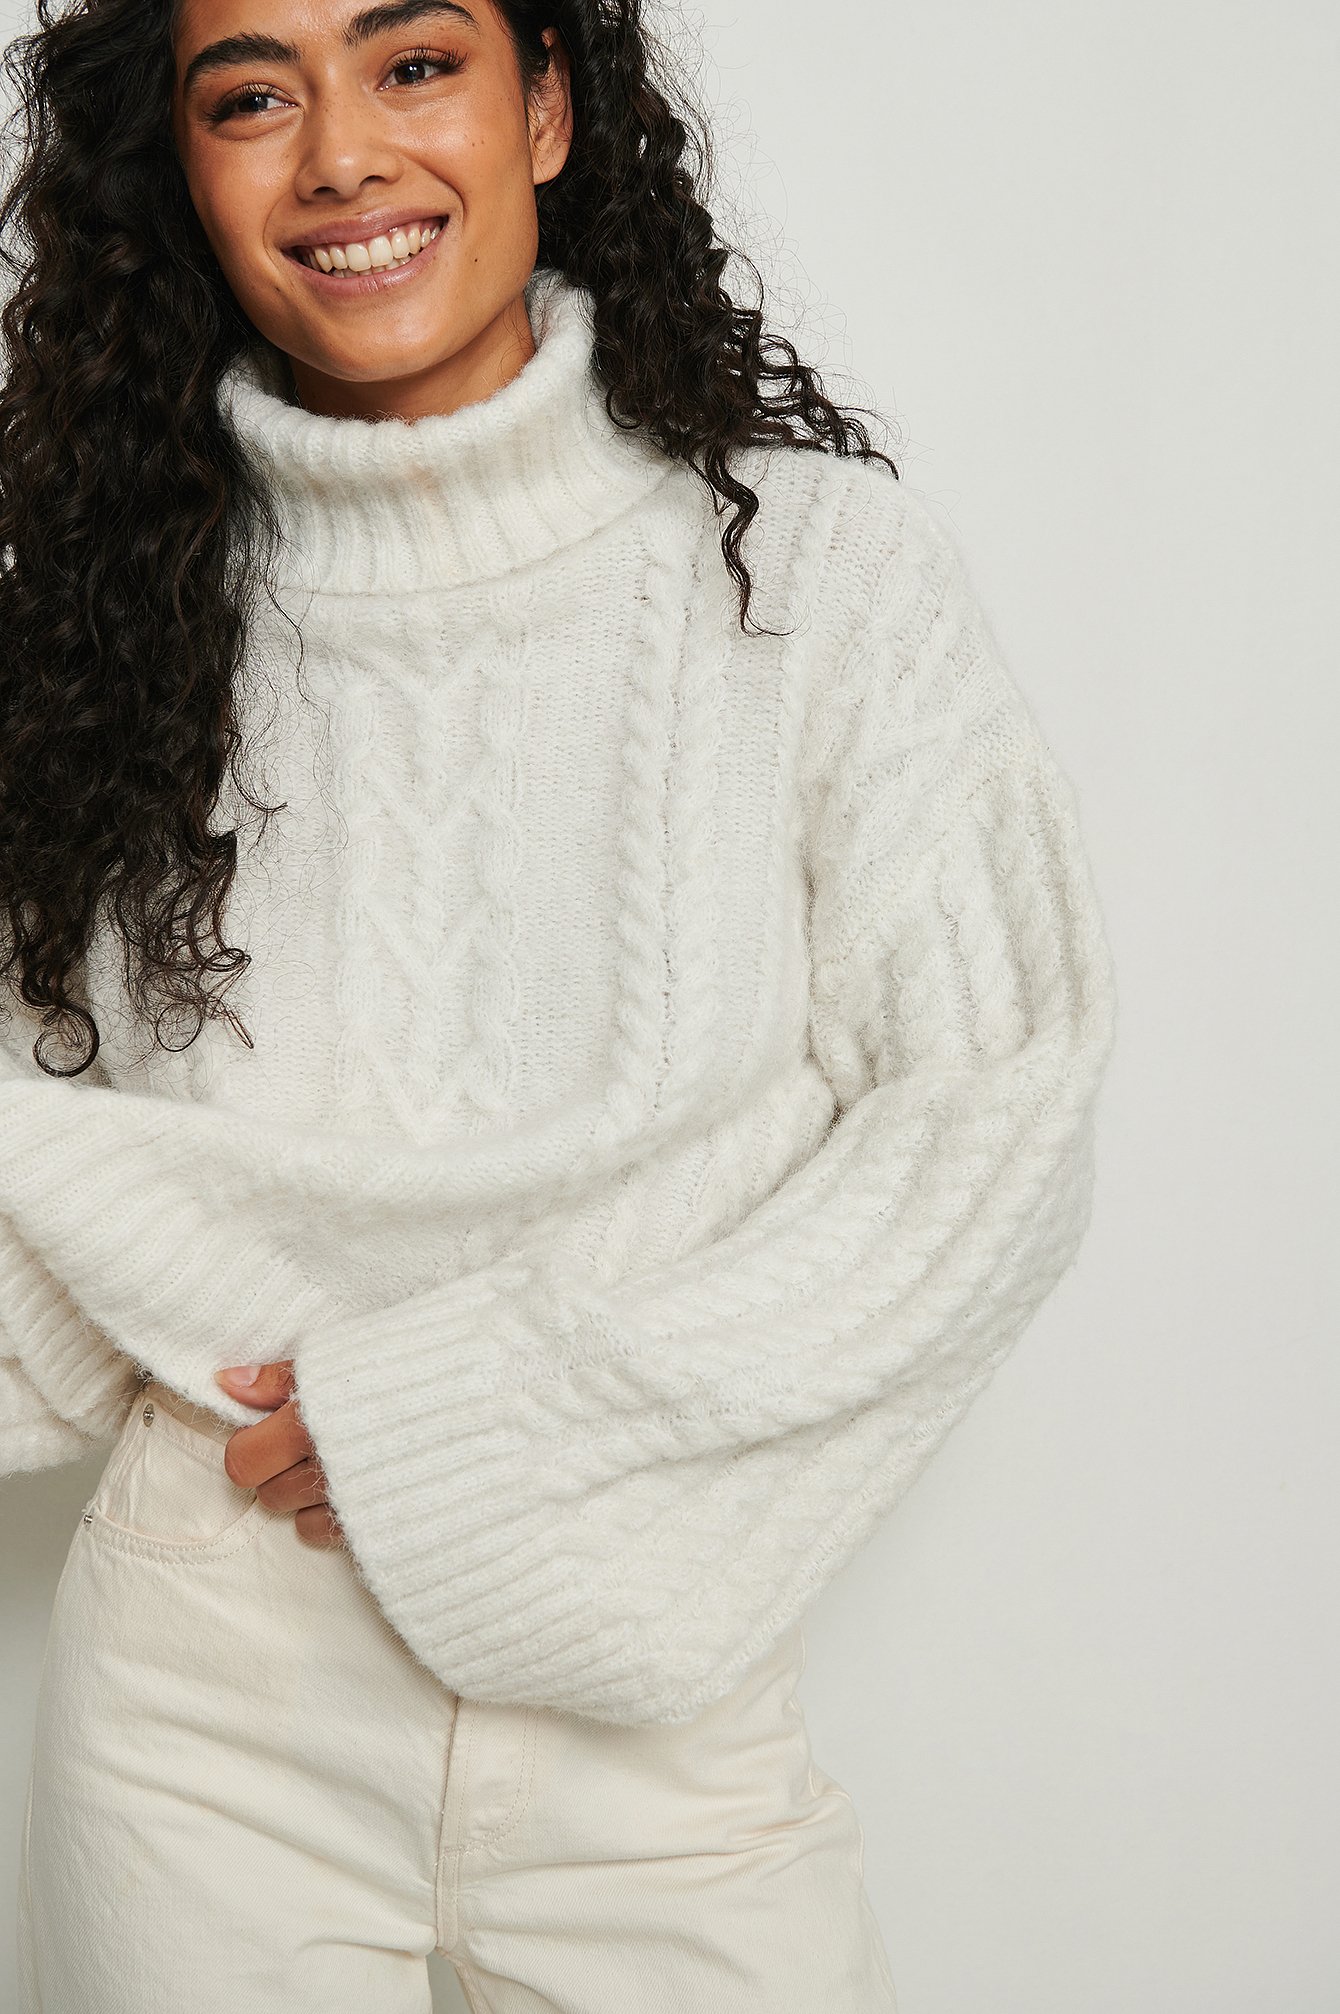 Boxy Cable Knit High Neck Sweater Outfit.